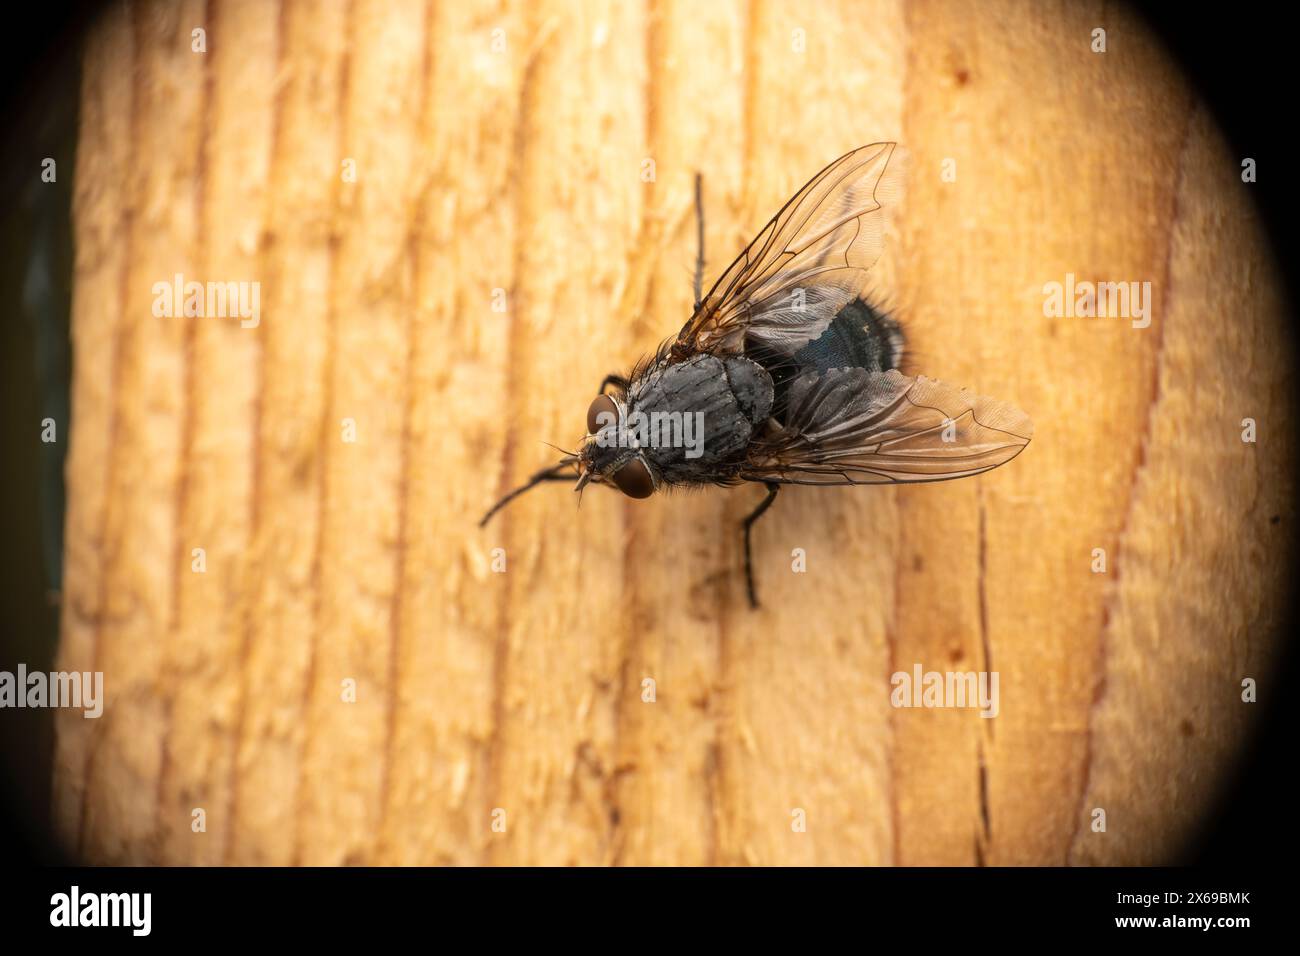 Calliphora vicina family Calliphoridae Genus Calliphora Blue Blowfly wild nature insect wallpaper, picture, photography Stock Photo